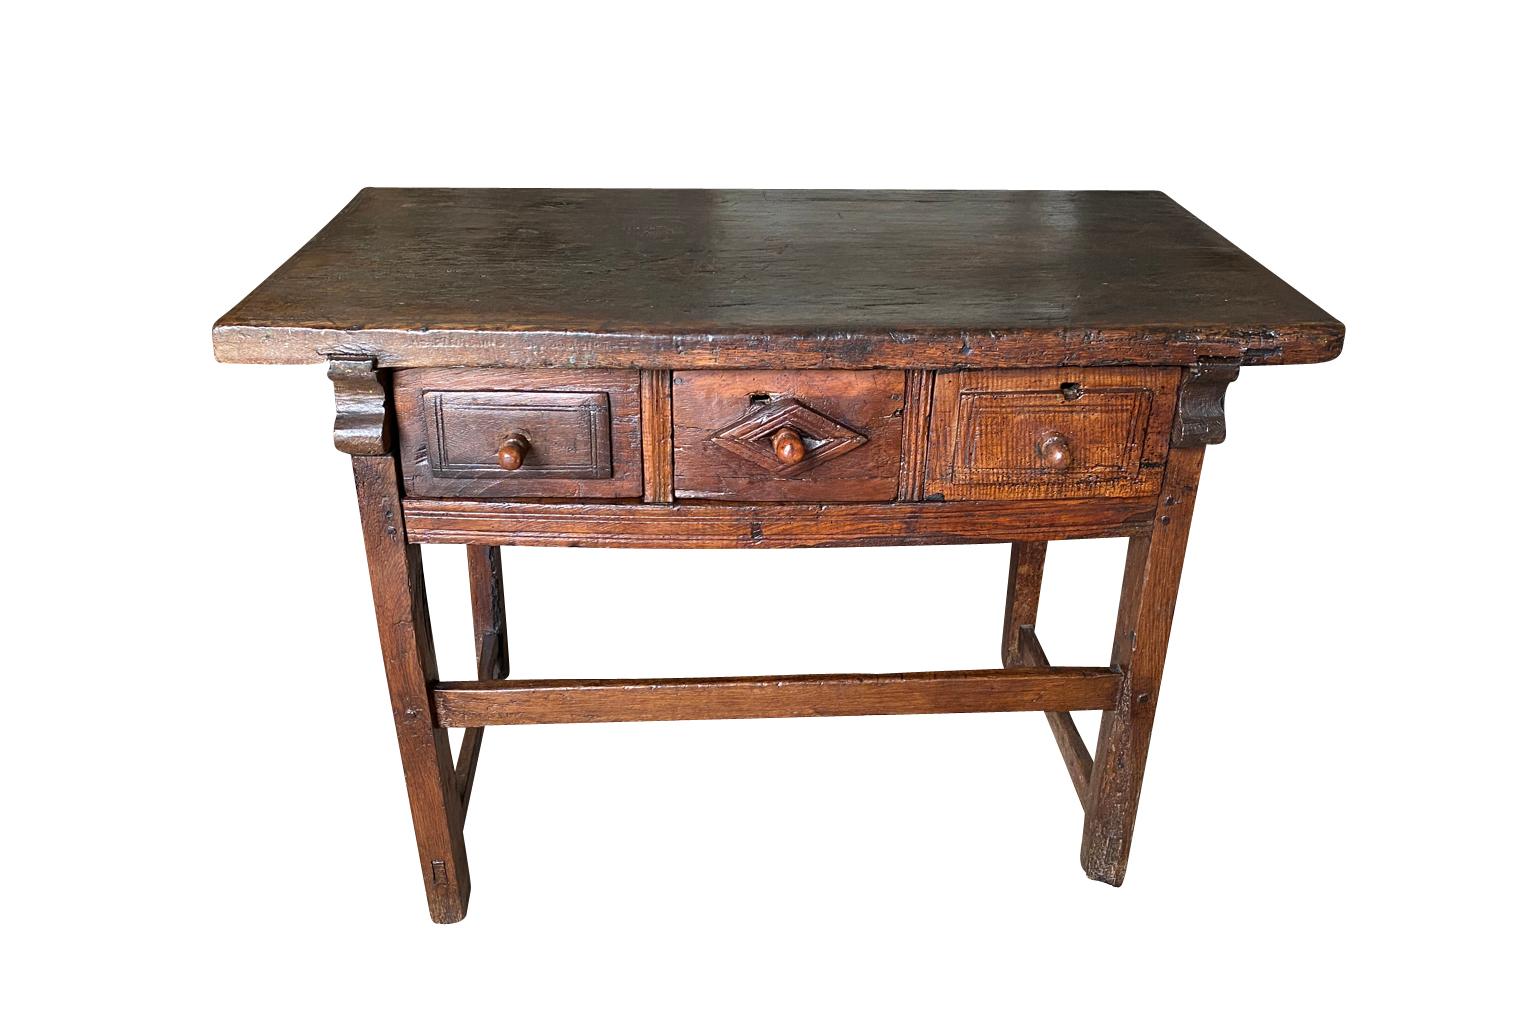 A very handsome 17th century Arte Populaire Side Table from the Ardeche region of France. Beautifully constructed from chestnut with a solid board top and 3 drawers. Sensational patina and graining.